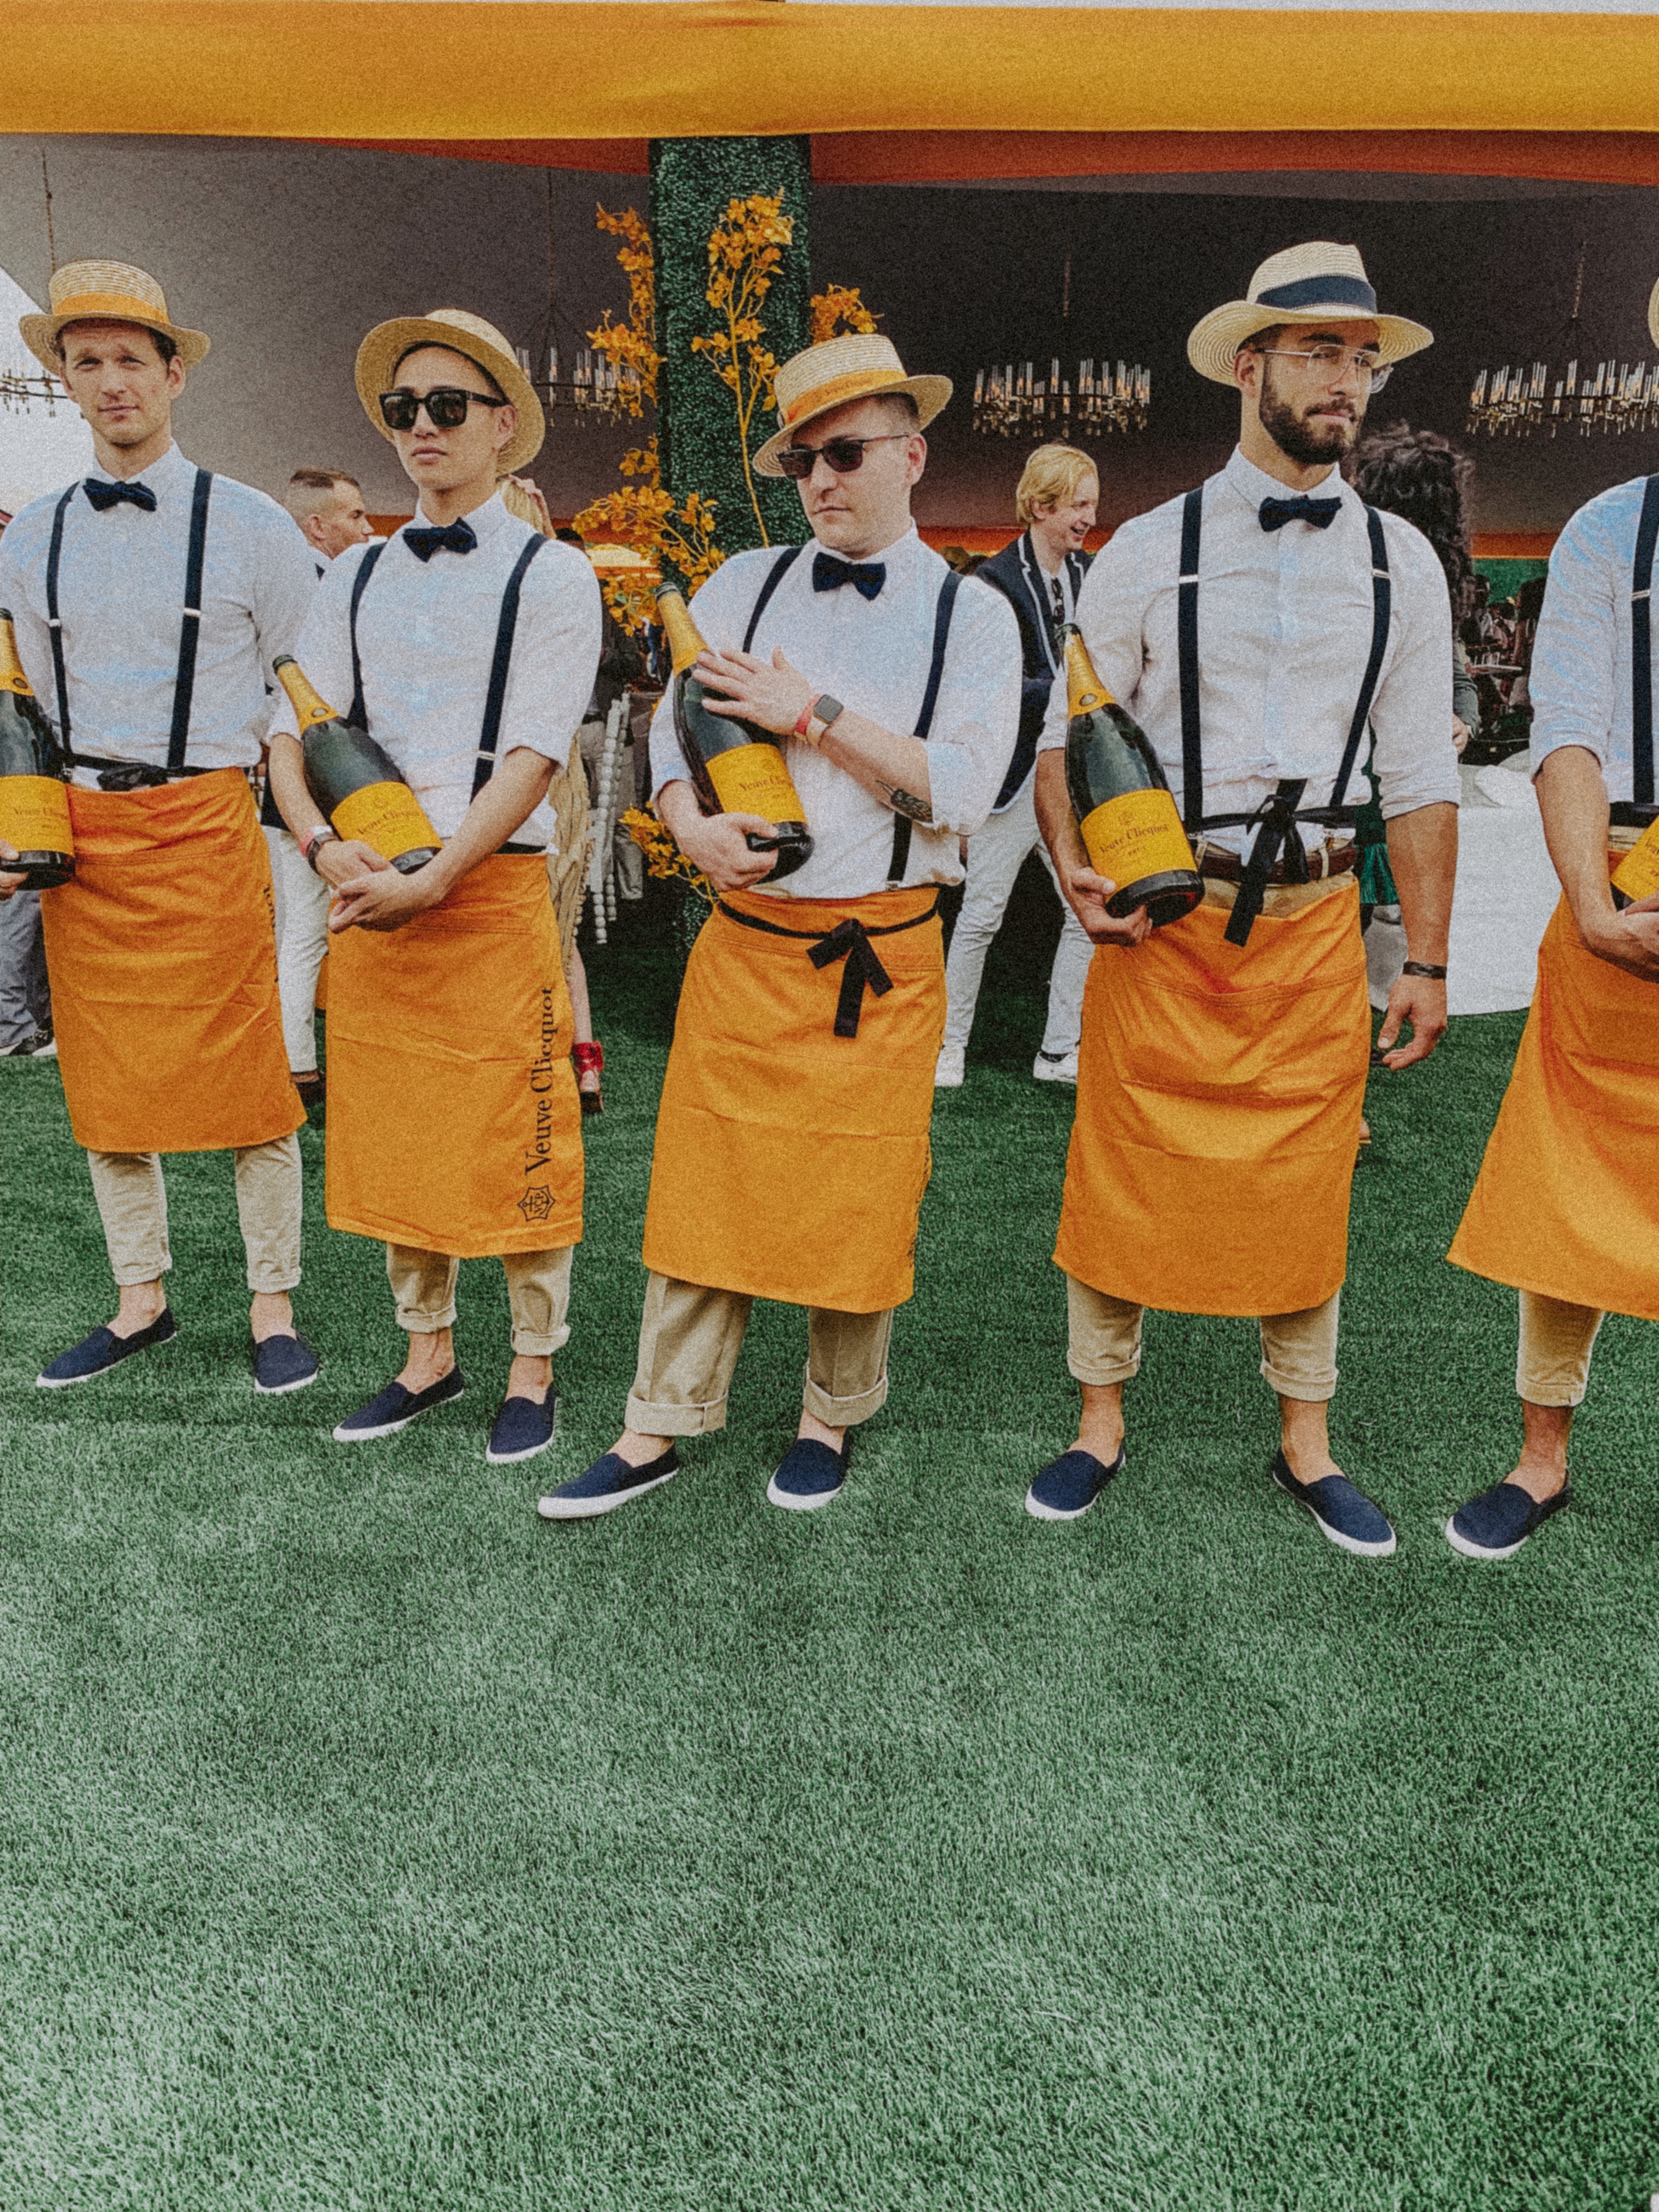 The Veuve Clicquot Polo Classic - A Guide to the Event